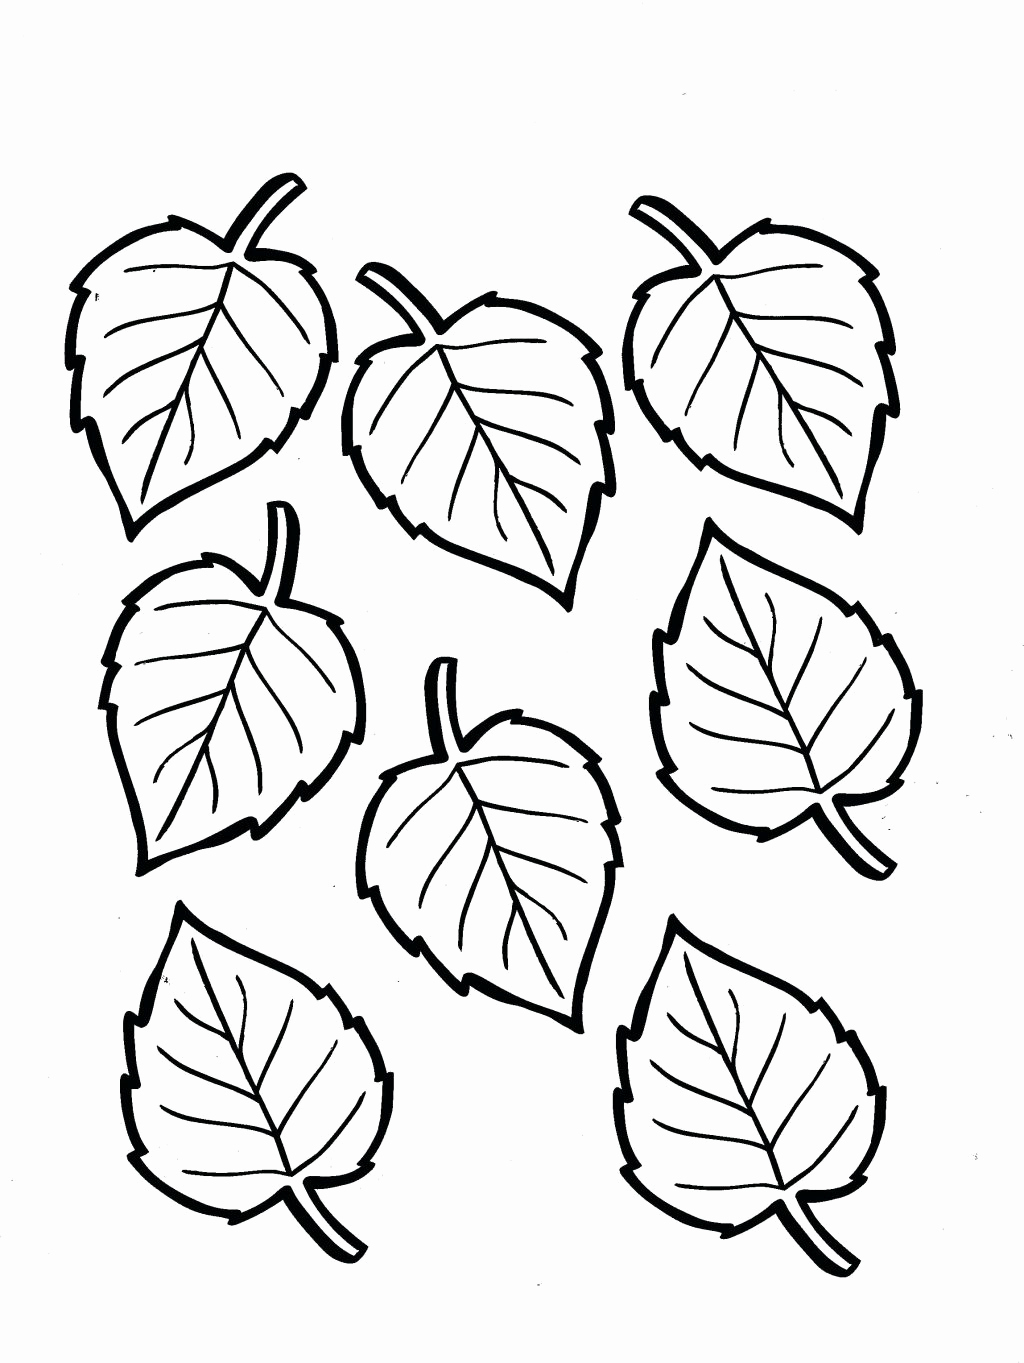 Fall Leaves Coloring Sheet from GetColorings.com